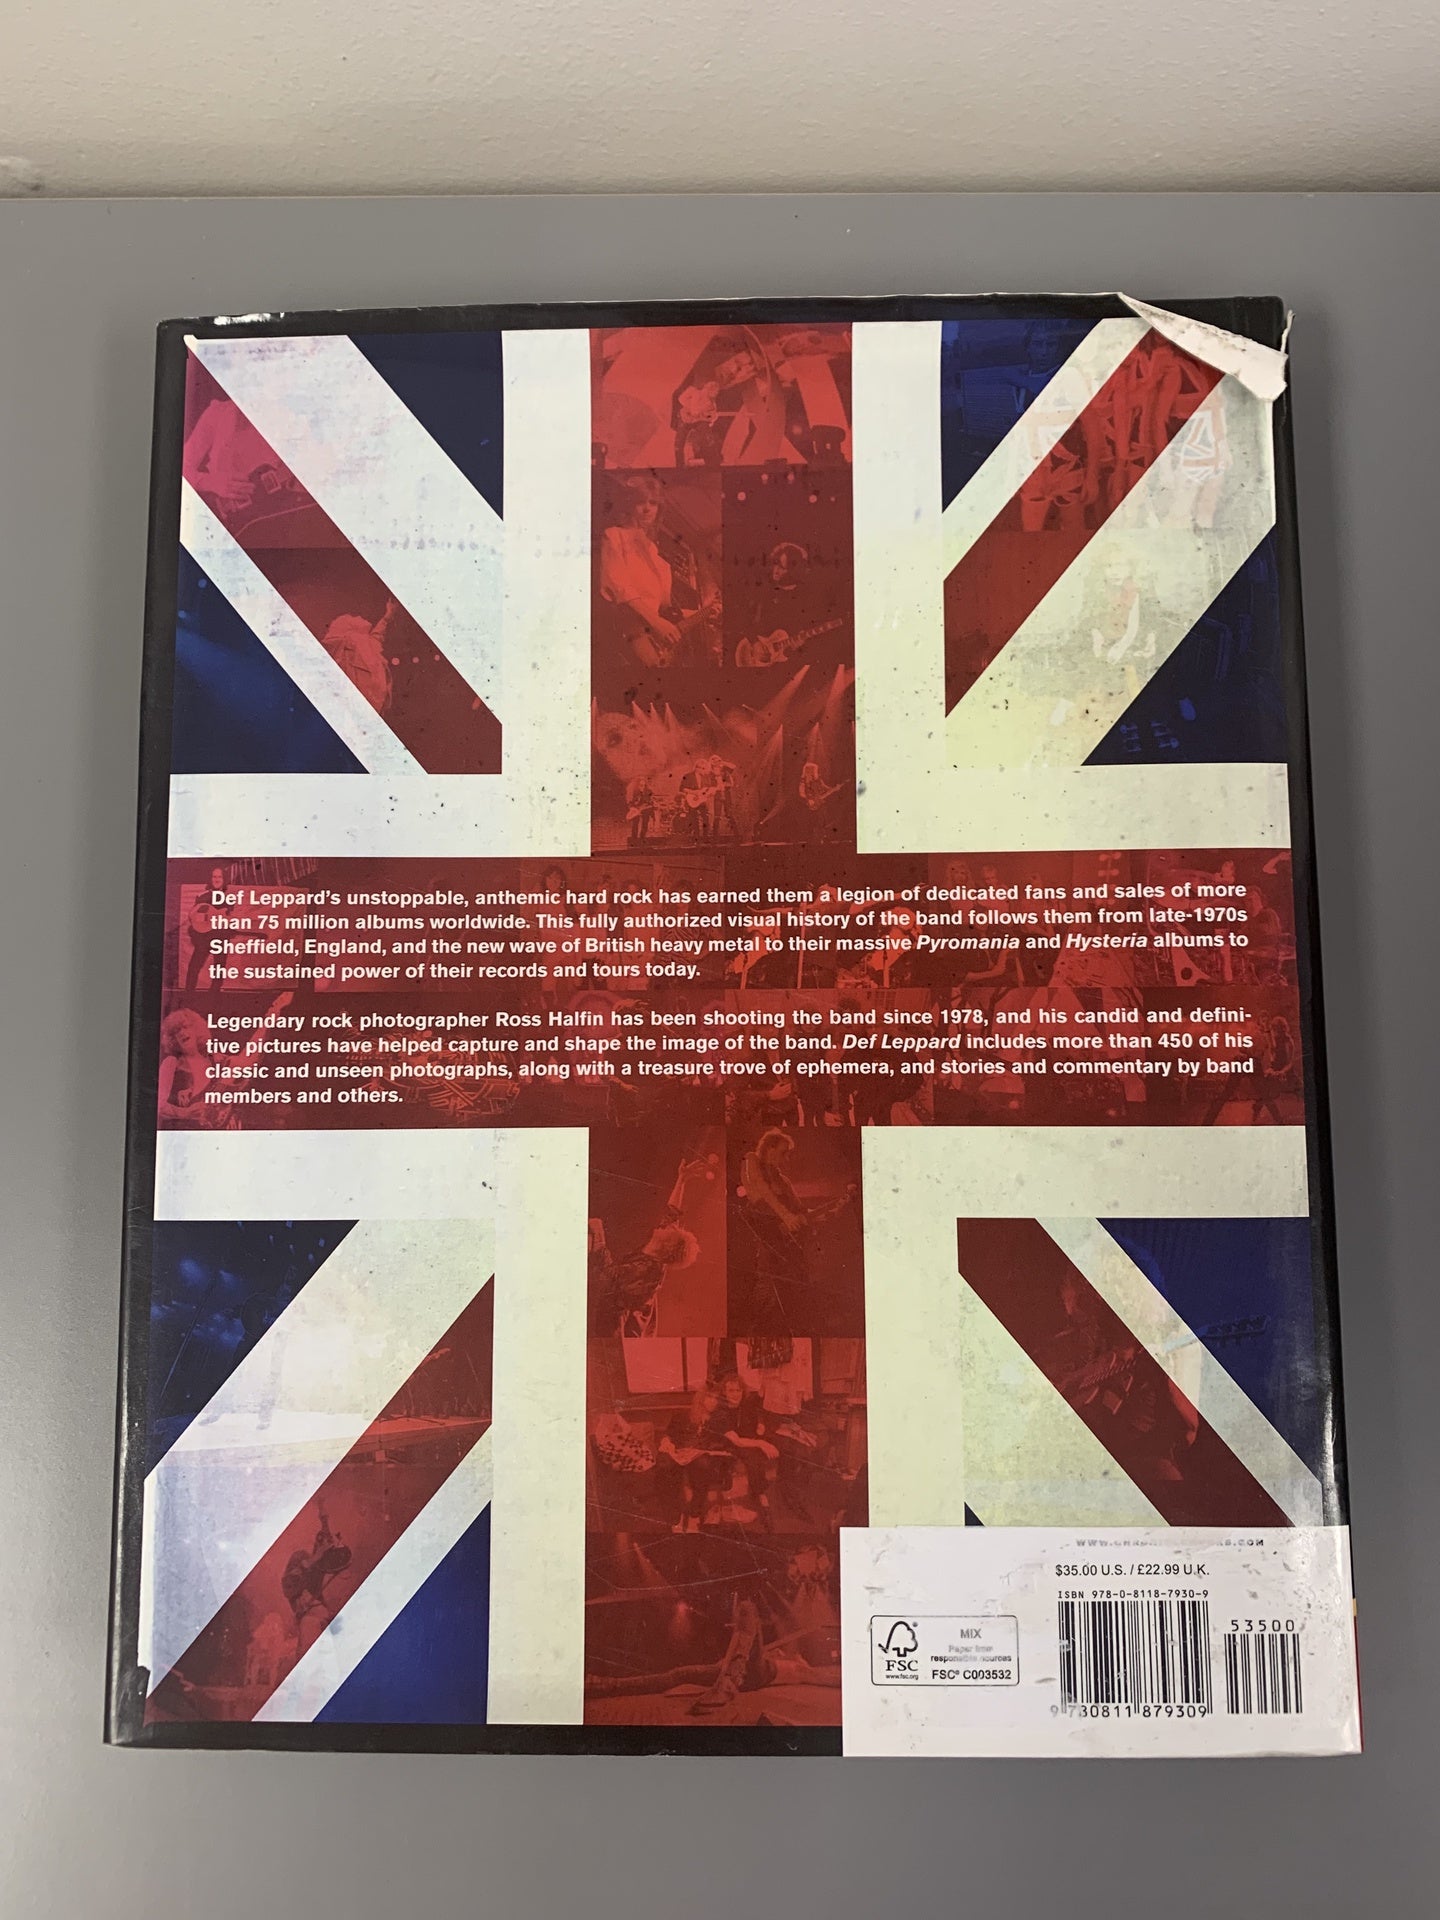 Def Leppard The Definitive Visual History book